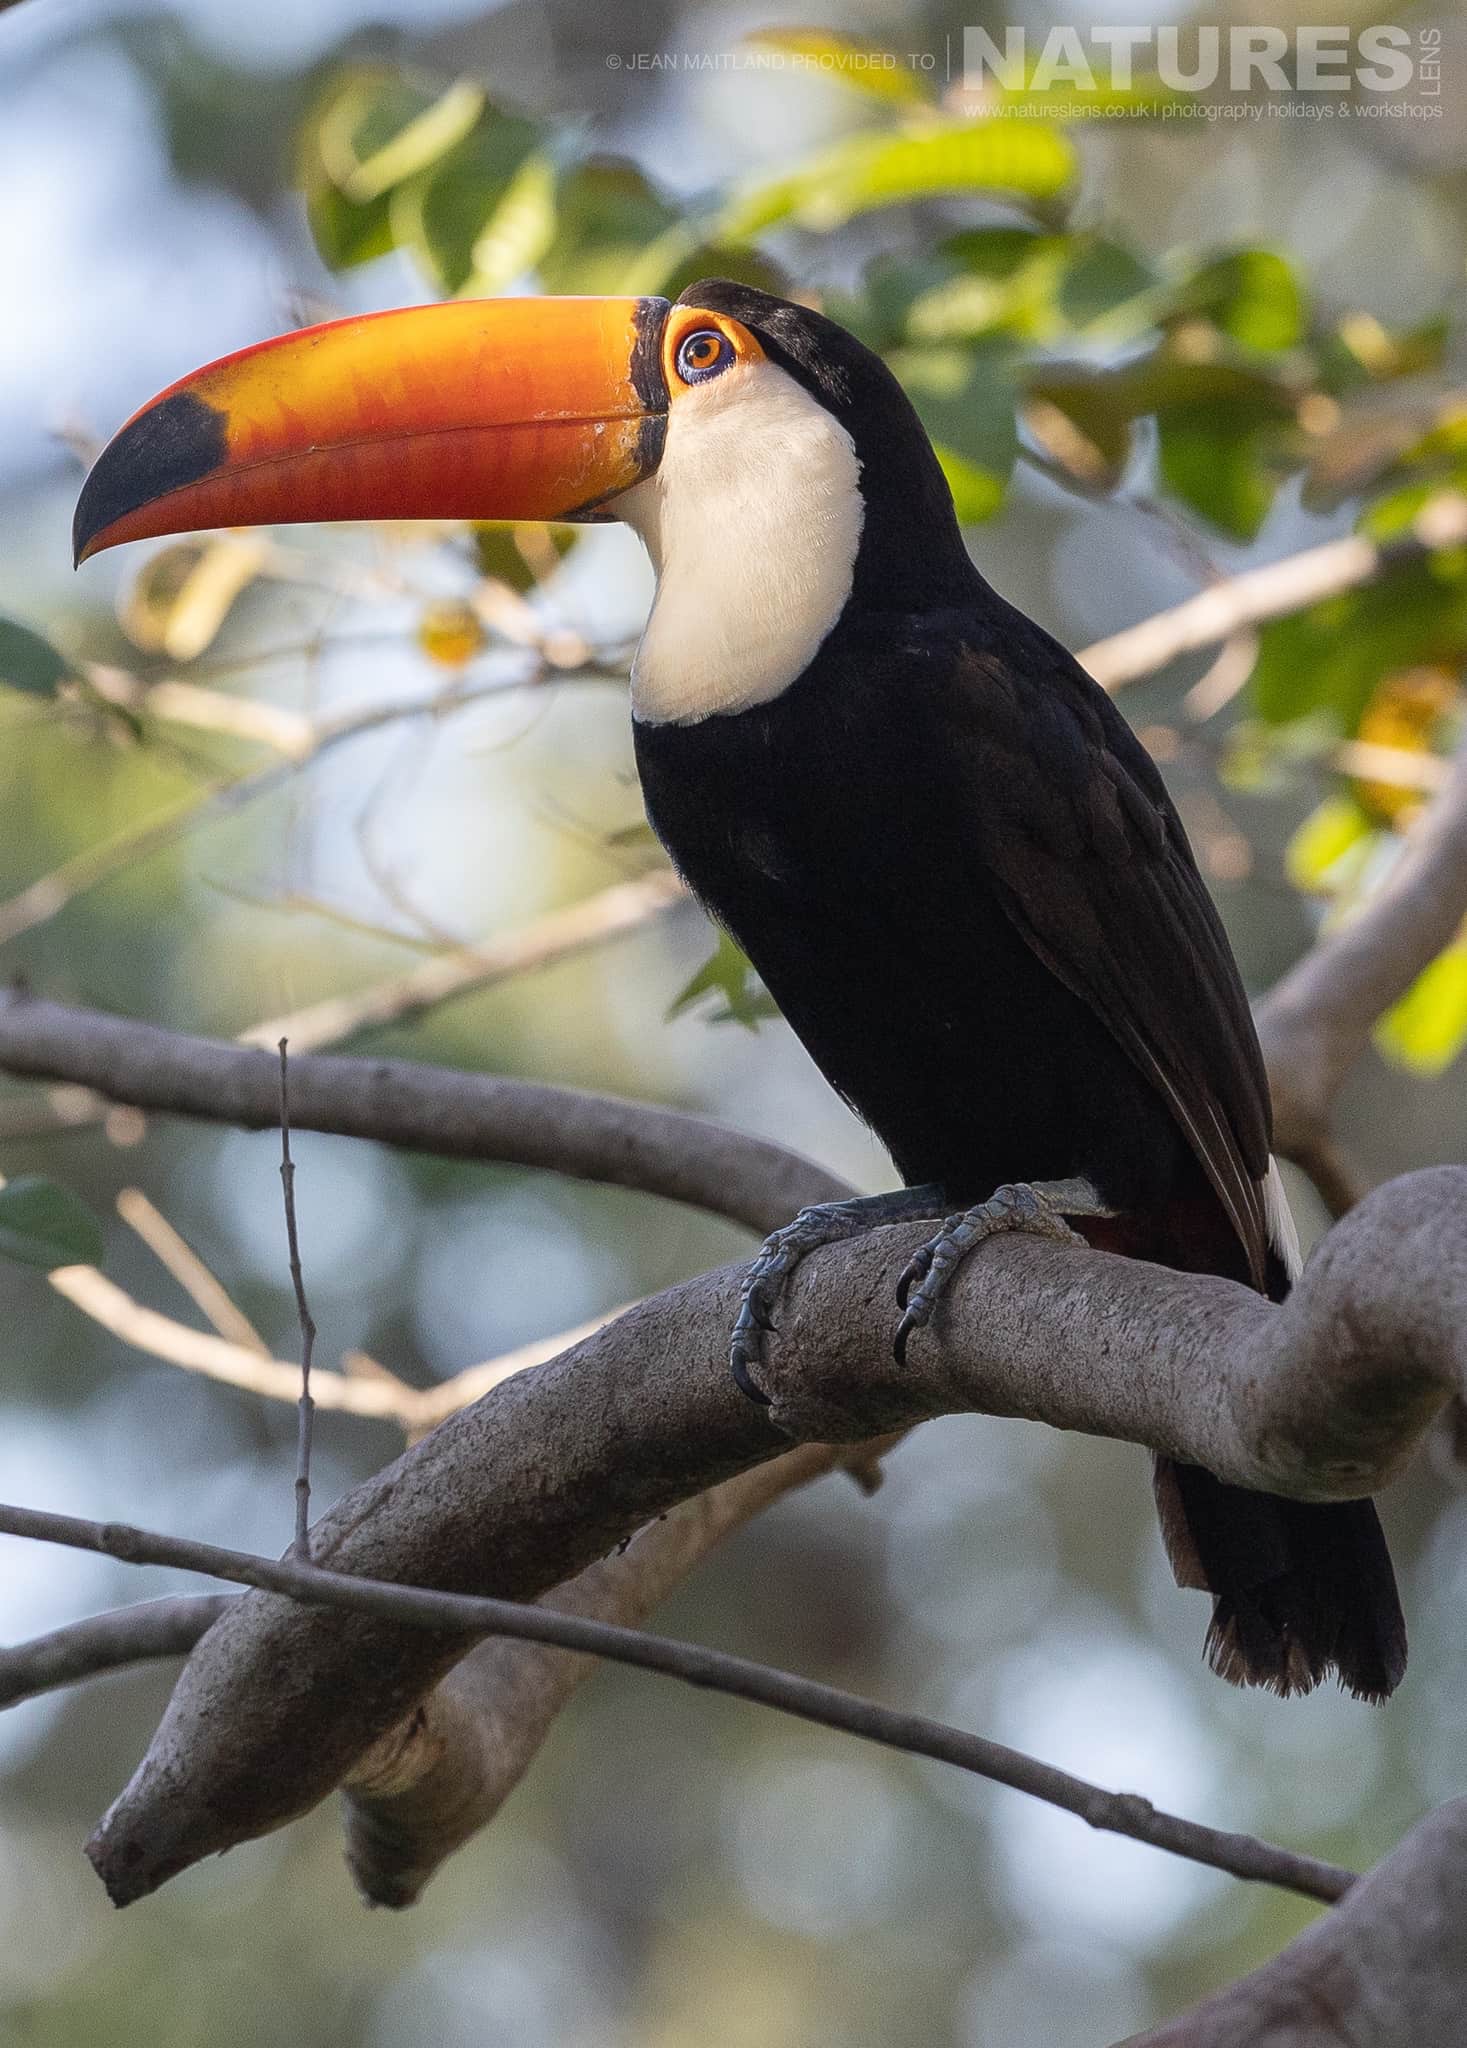 An Toco Toucan Perched In A Tree On The Banks Of The Pantanal River During The Natureslens Jaguars Of The Pantanal Photography Holiday